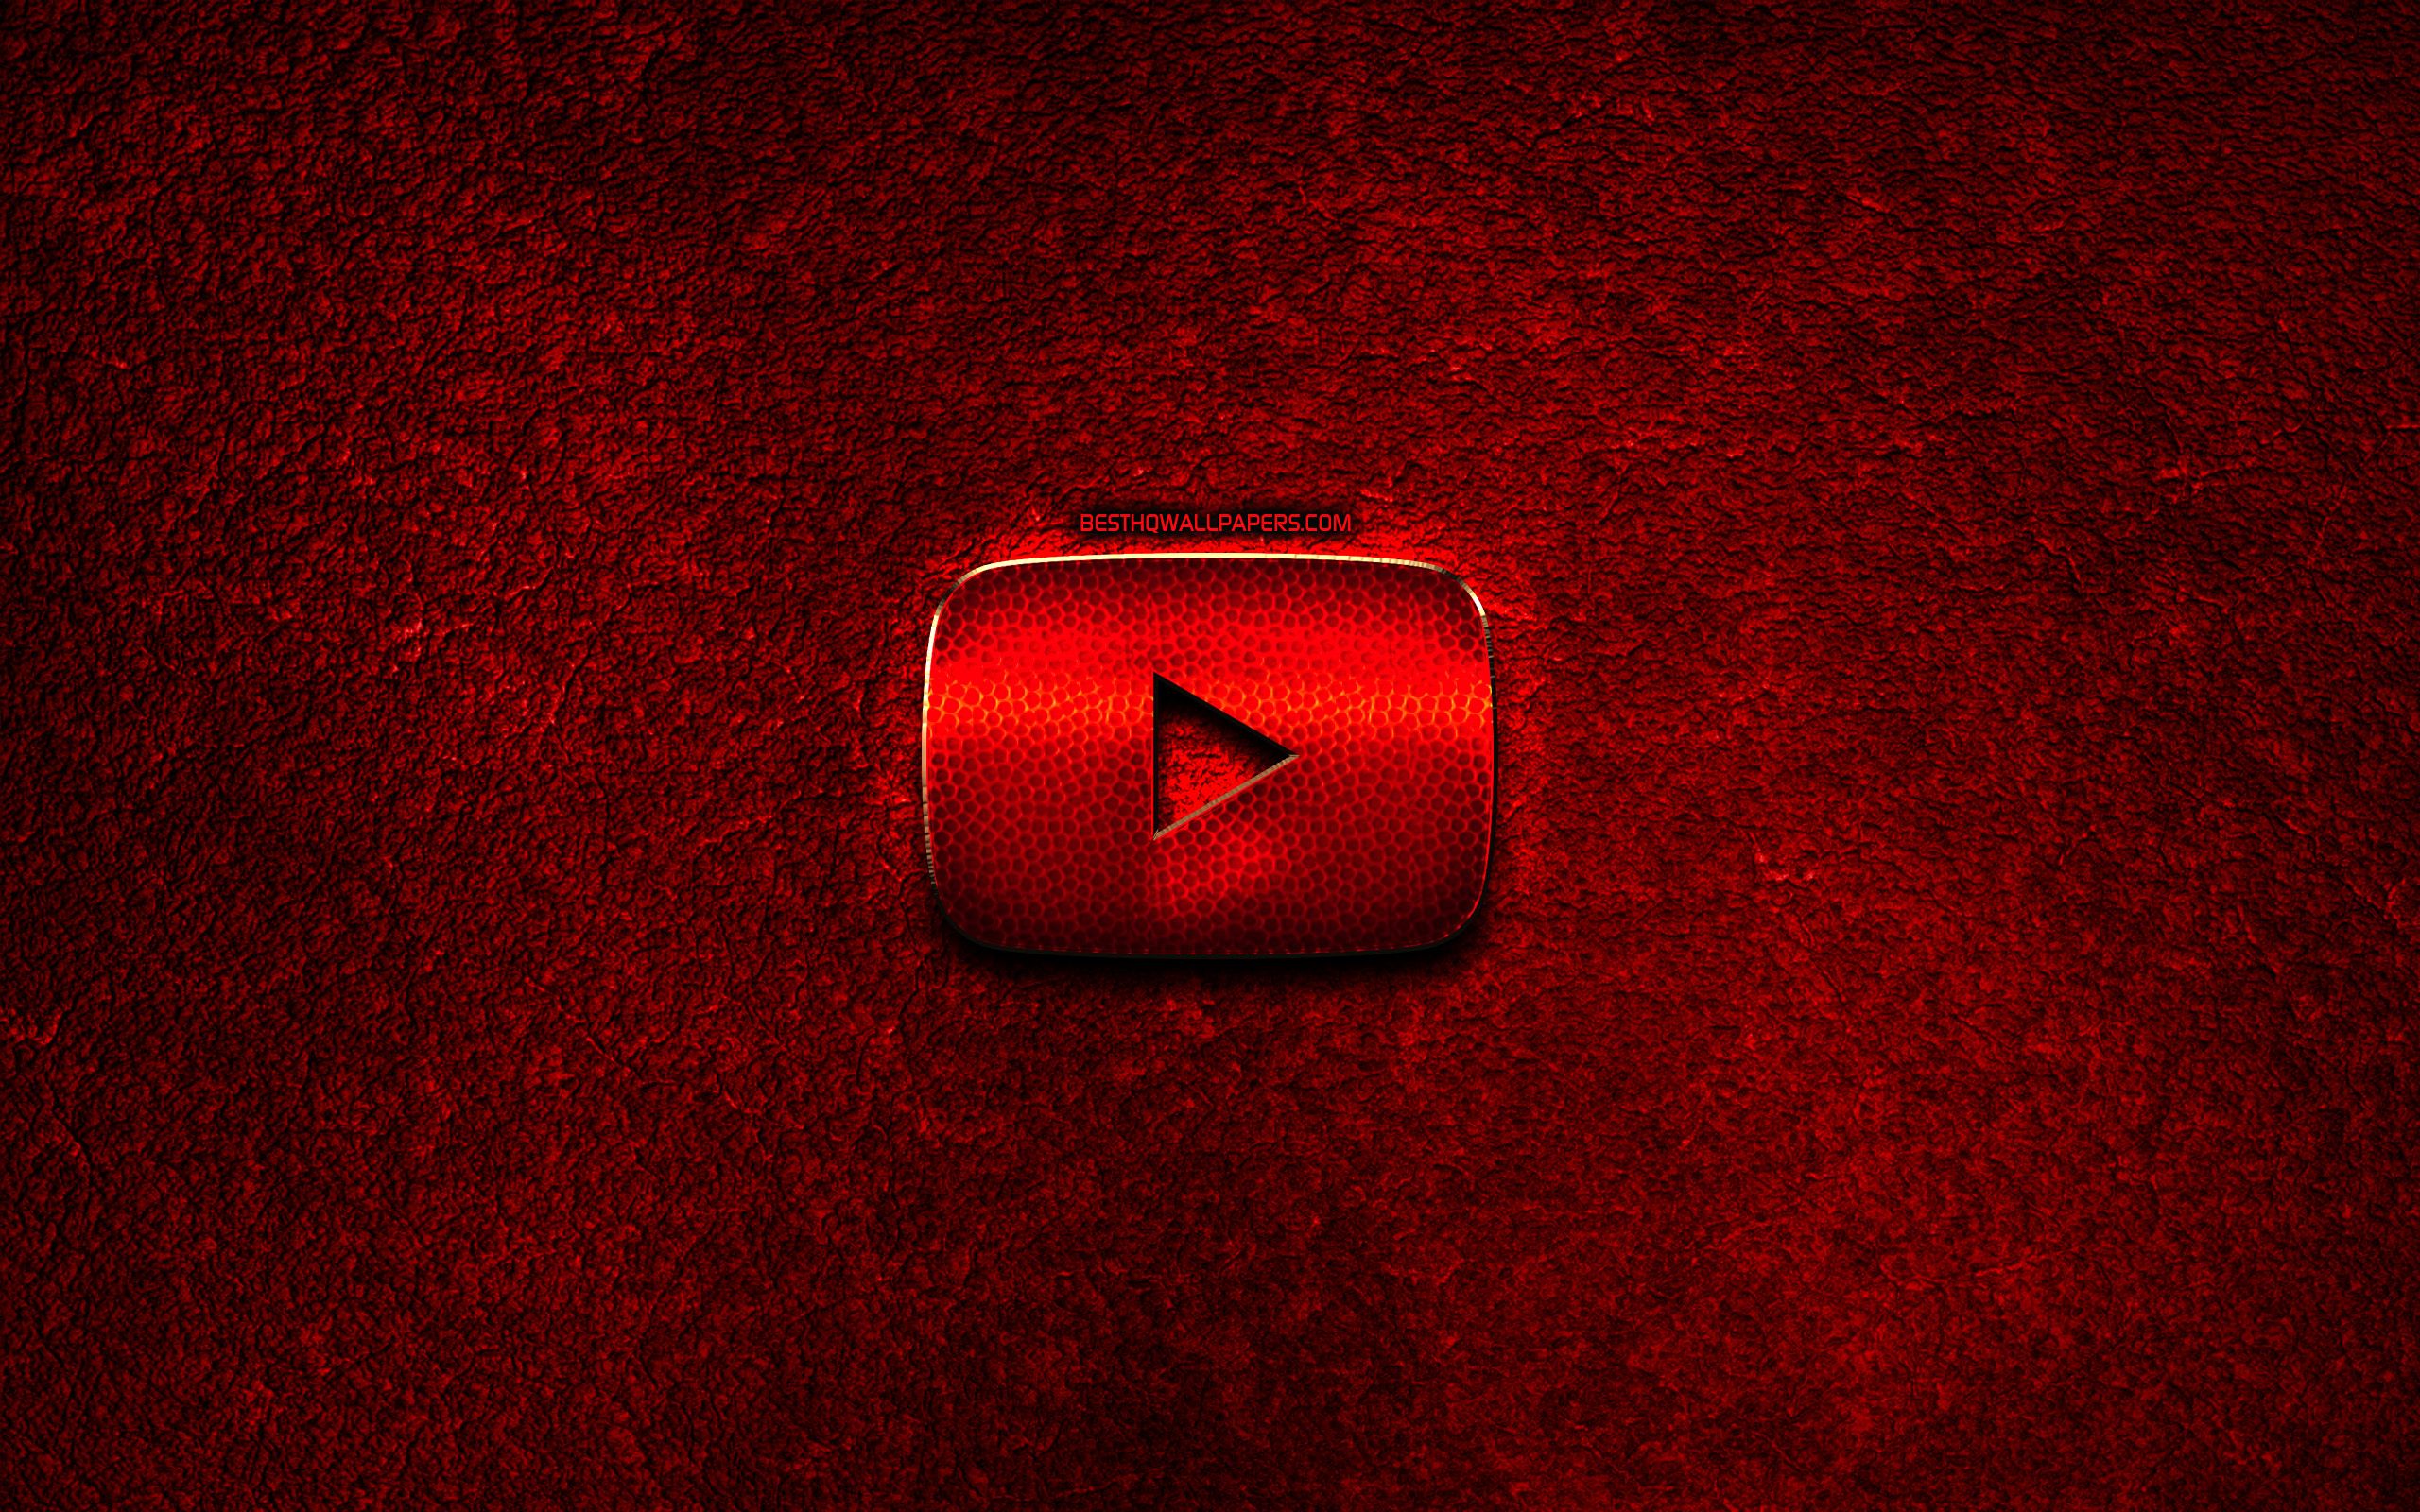 Download wallpaper Youtube logo, red stone background, creative, Youtube, brands, Youtube 3D logo, artwork, Youtube red metal logo for desktop with resolution 2560x1600. High Quality HD picture wallpaper